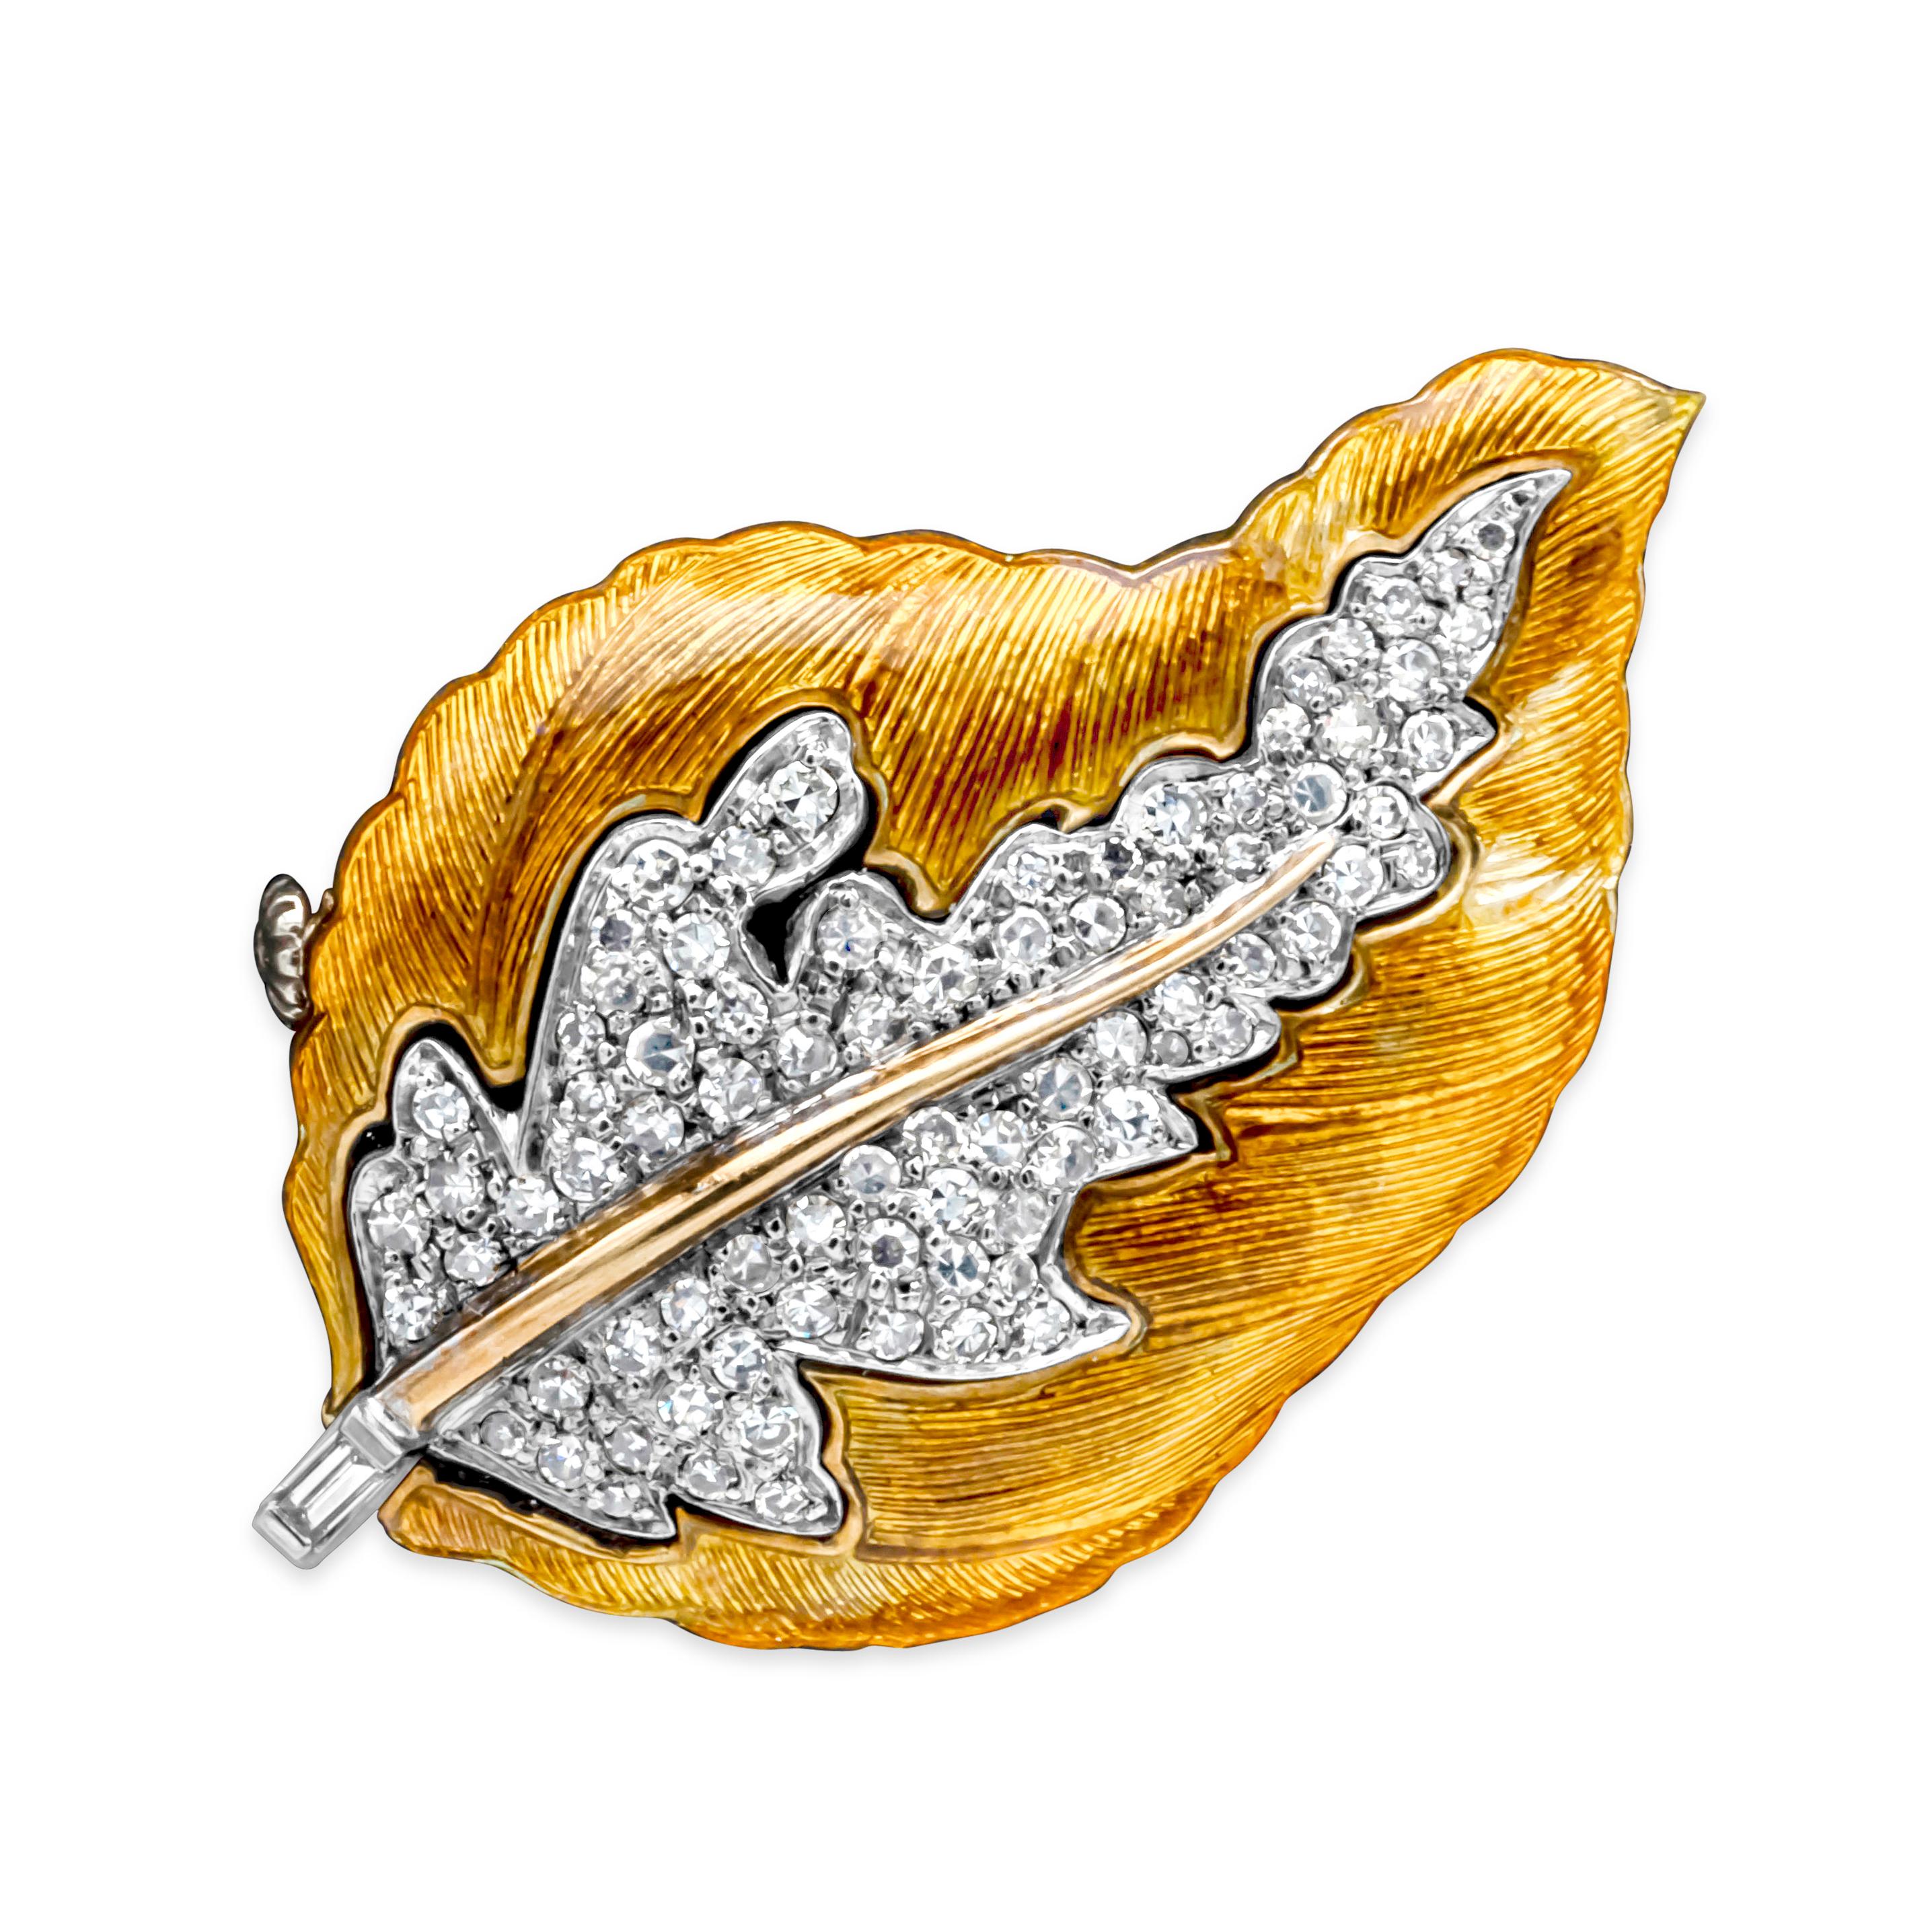 Showcasing a classic and color-rich brooch set in a leaf-like design and encrusted with 80 brilliant round diamonds, pave set weighing 0.85 carats total, F-G color and VS-SI in clarity. The entire leaf is mix of yellowish and orange enamel inlays